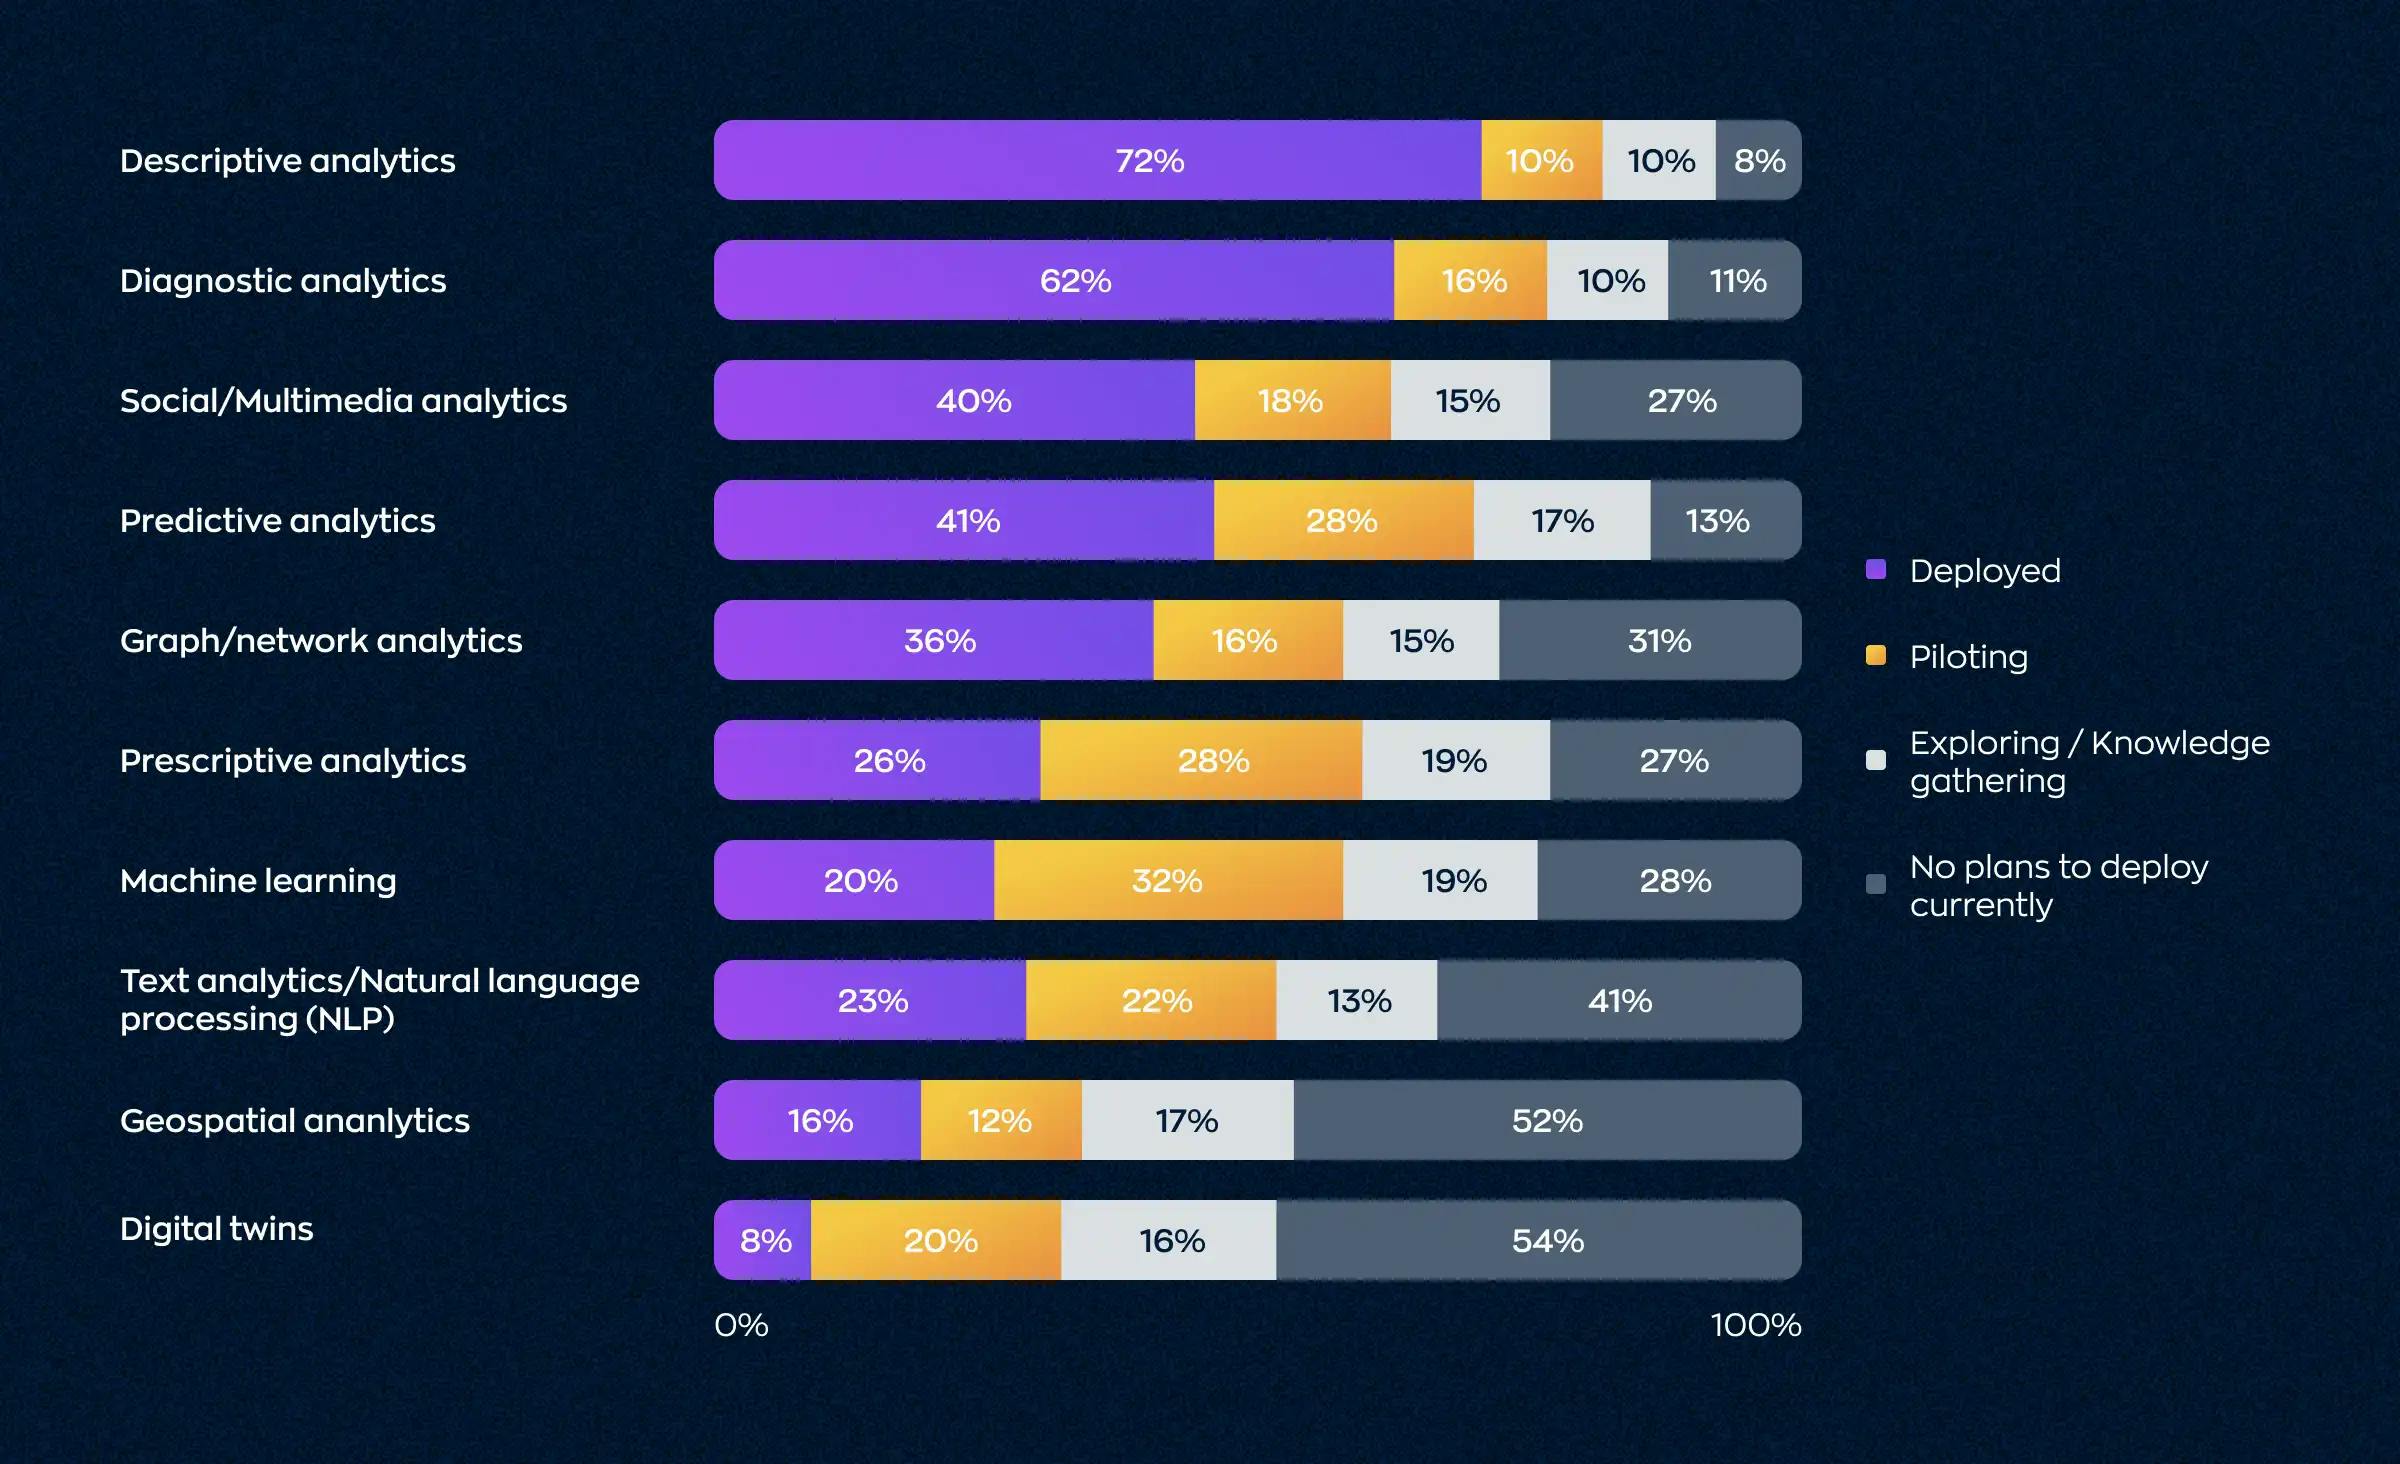 The stats display various enterprise AI technologies that have been adopted: Descriptive analytics lead at 72%, followed by Diagnostic analytics at 62%, Social/Multimedia analytics at 40%, Predictive analytics at 41%, Graph/Network analytics at 36%, Prescriptive analytics at 26%, Machine learning at 20%, Text analytics/Natural Language Processing (NLP) at 23%, Geospatial analytics at 16%, and Digital twins at 8%.